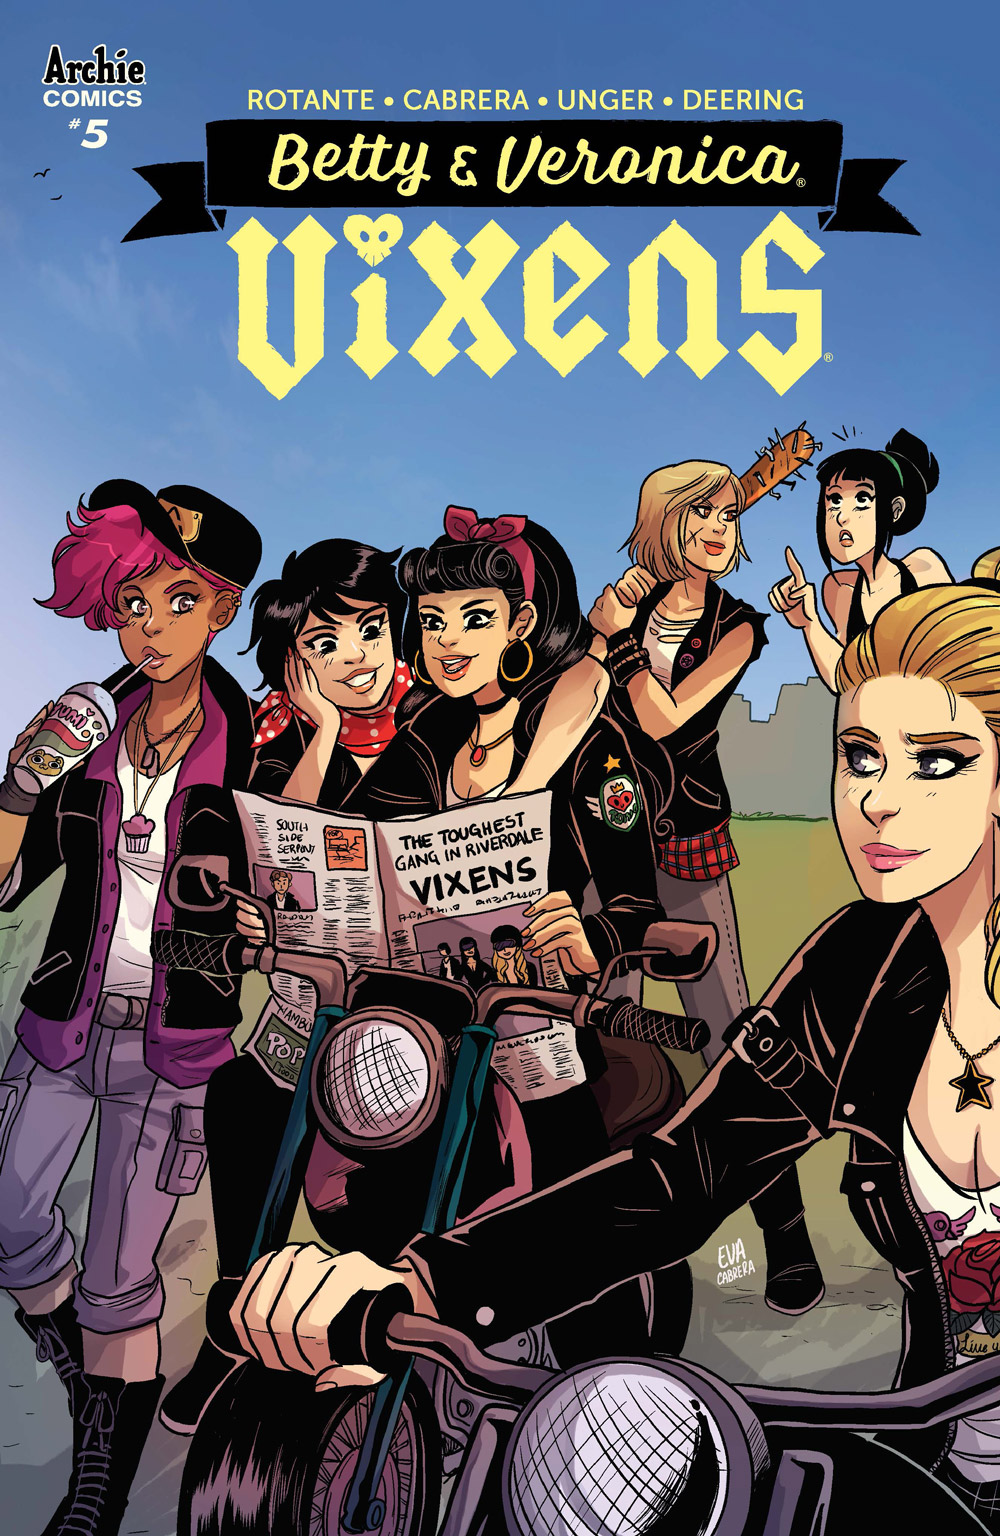 The Vixens' secret is out in this early preview of BETTY & VERONICA ...